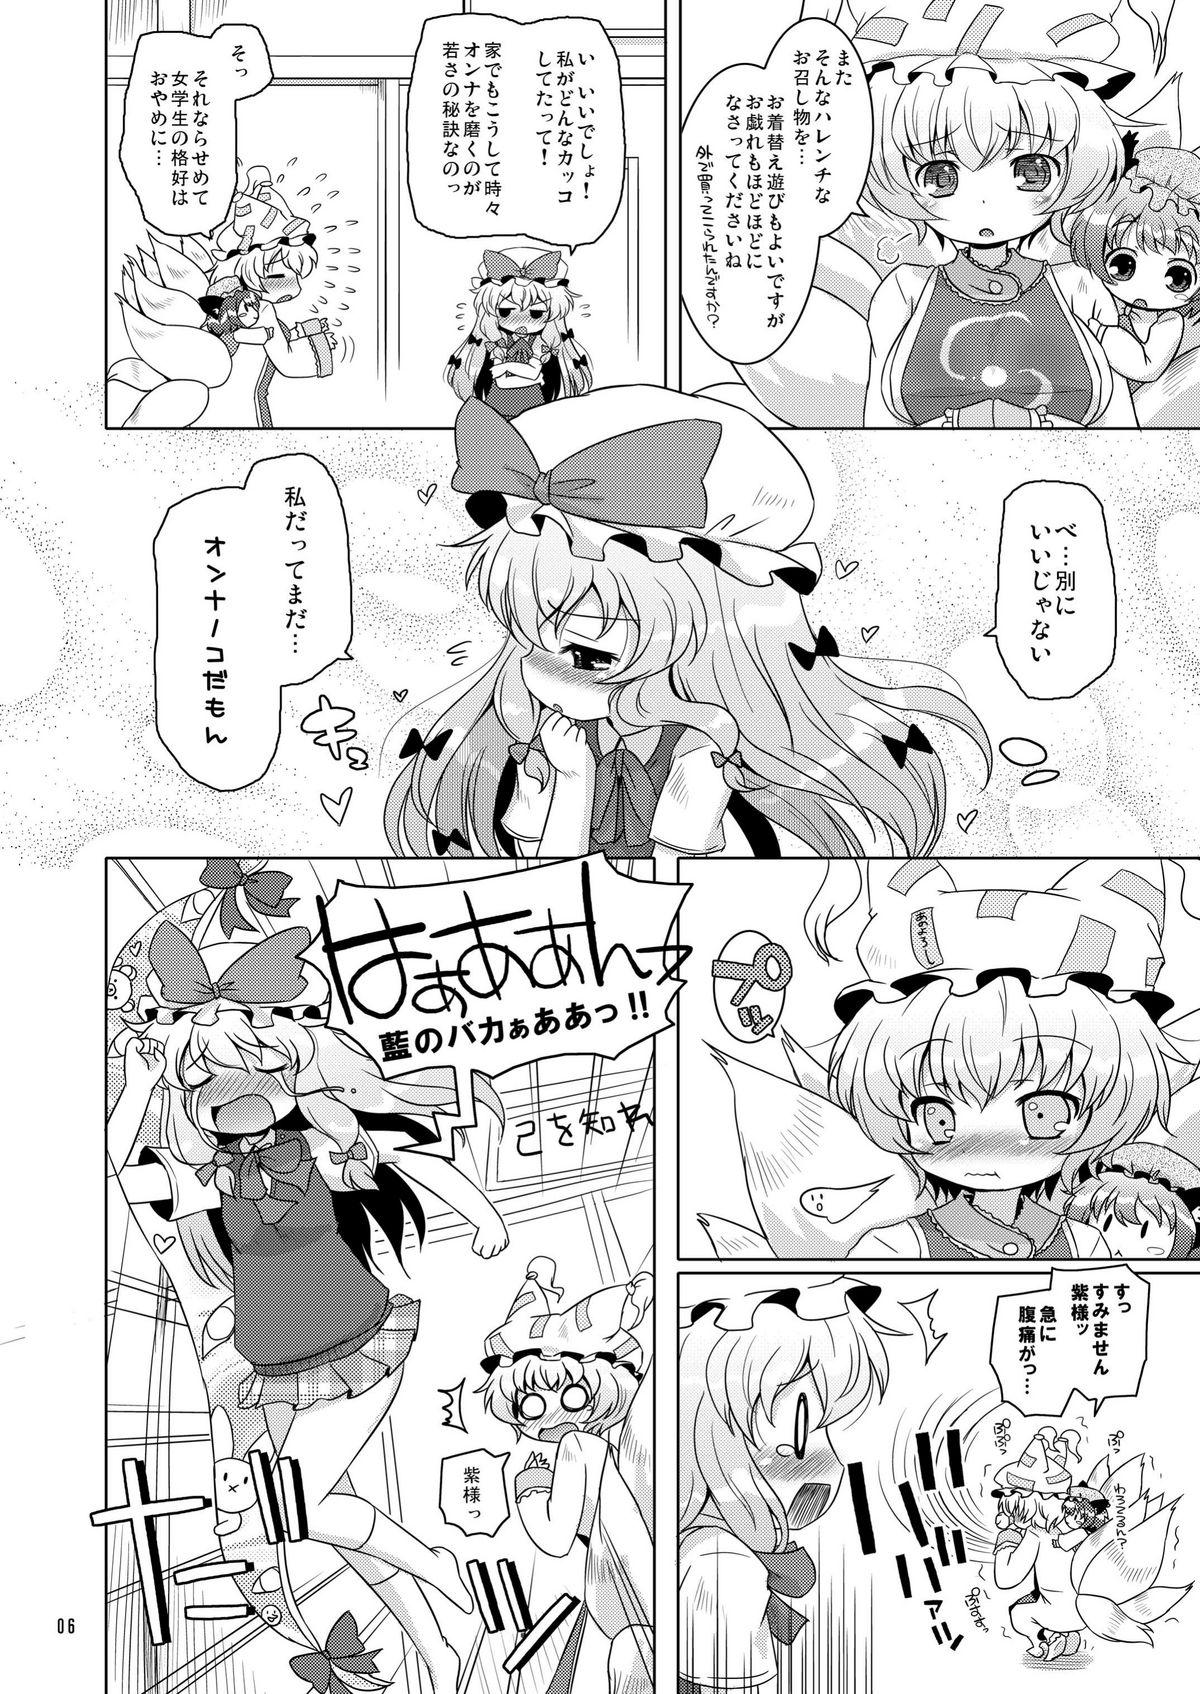 Forbidden Love Me! Fancy Baby Doll - Touhou project Tats - Page 6